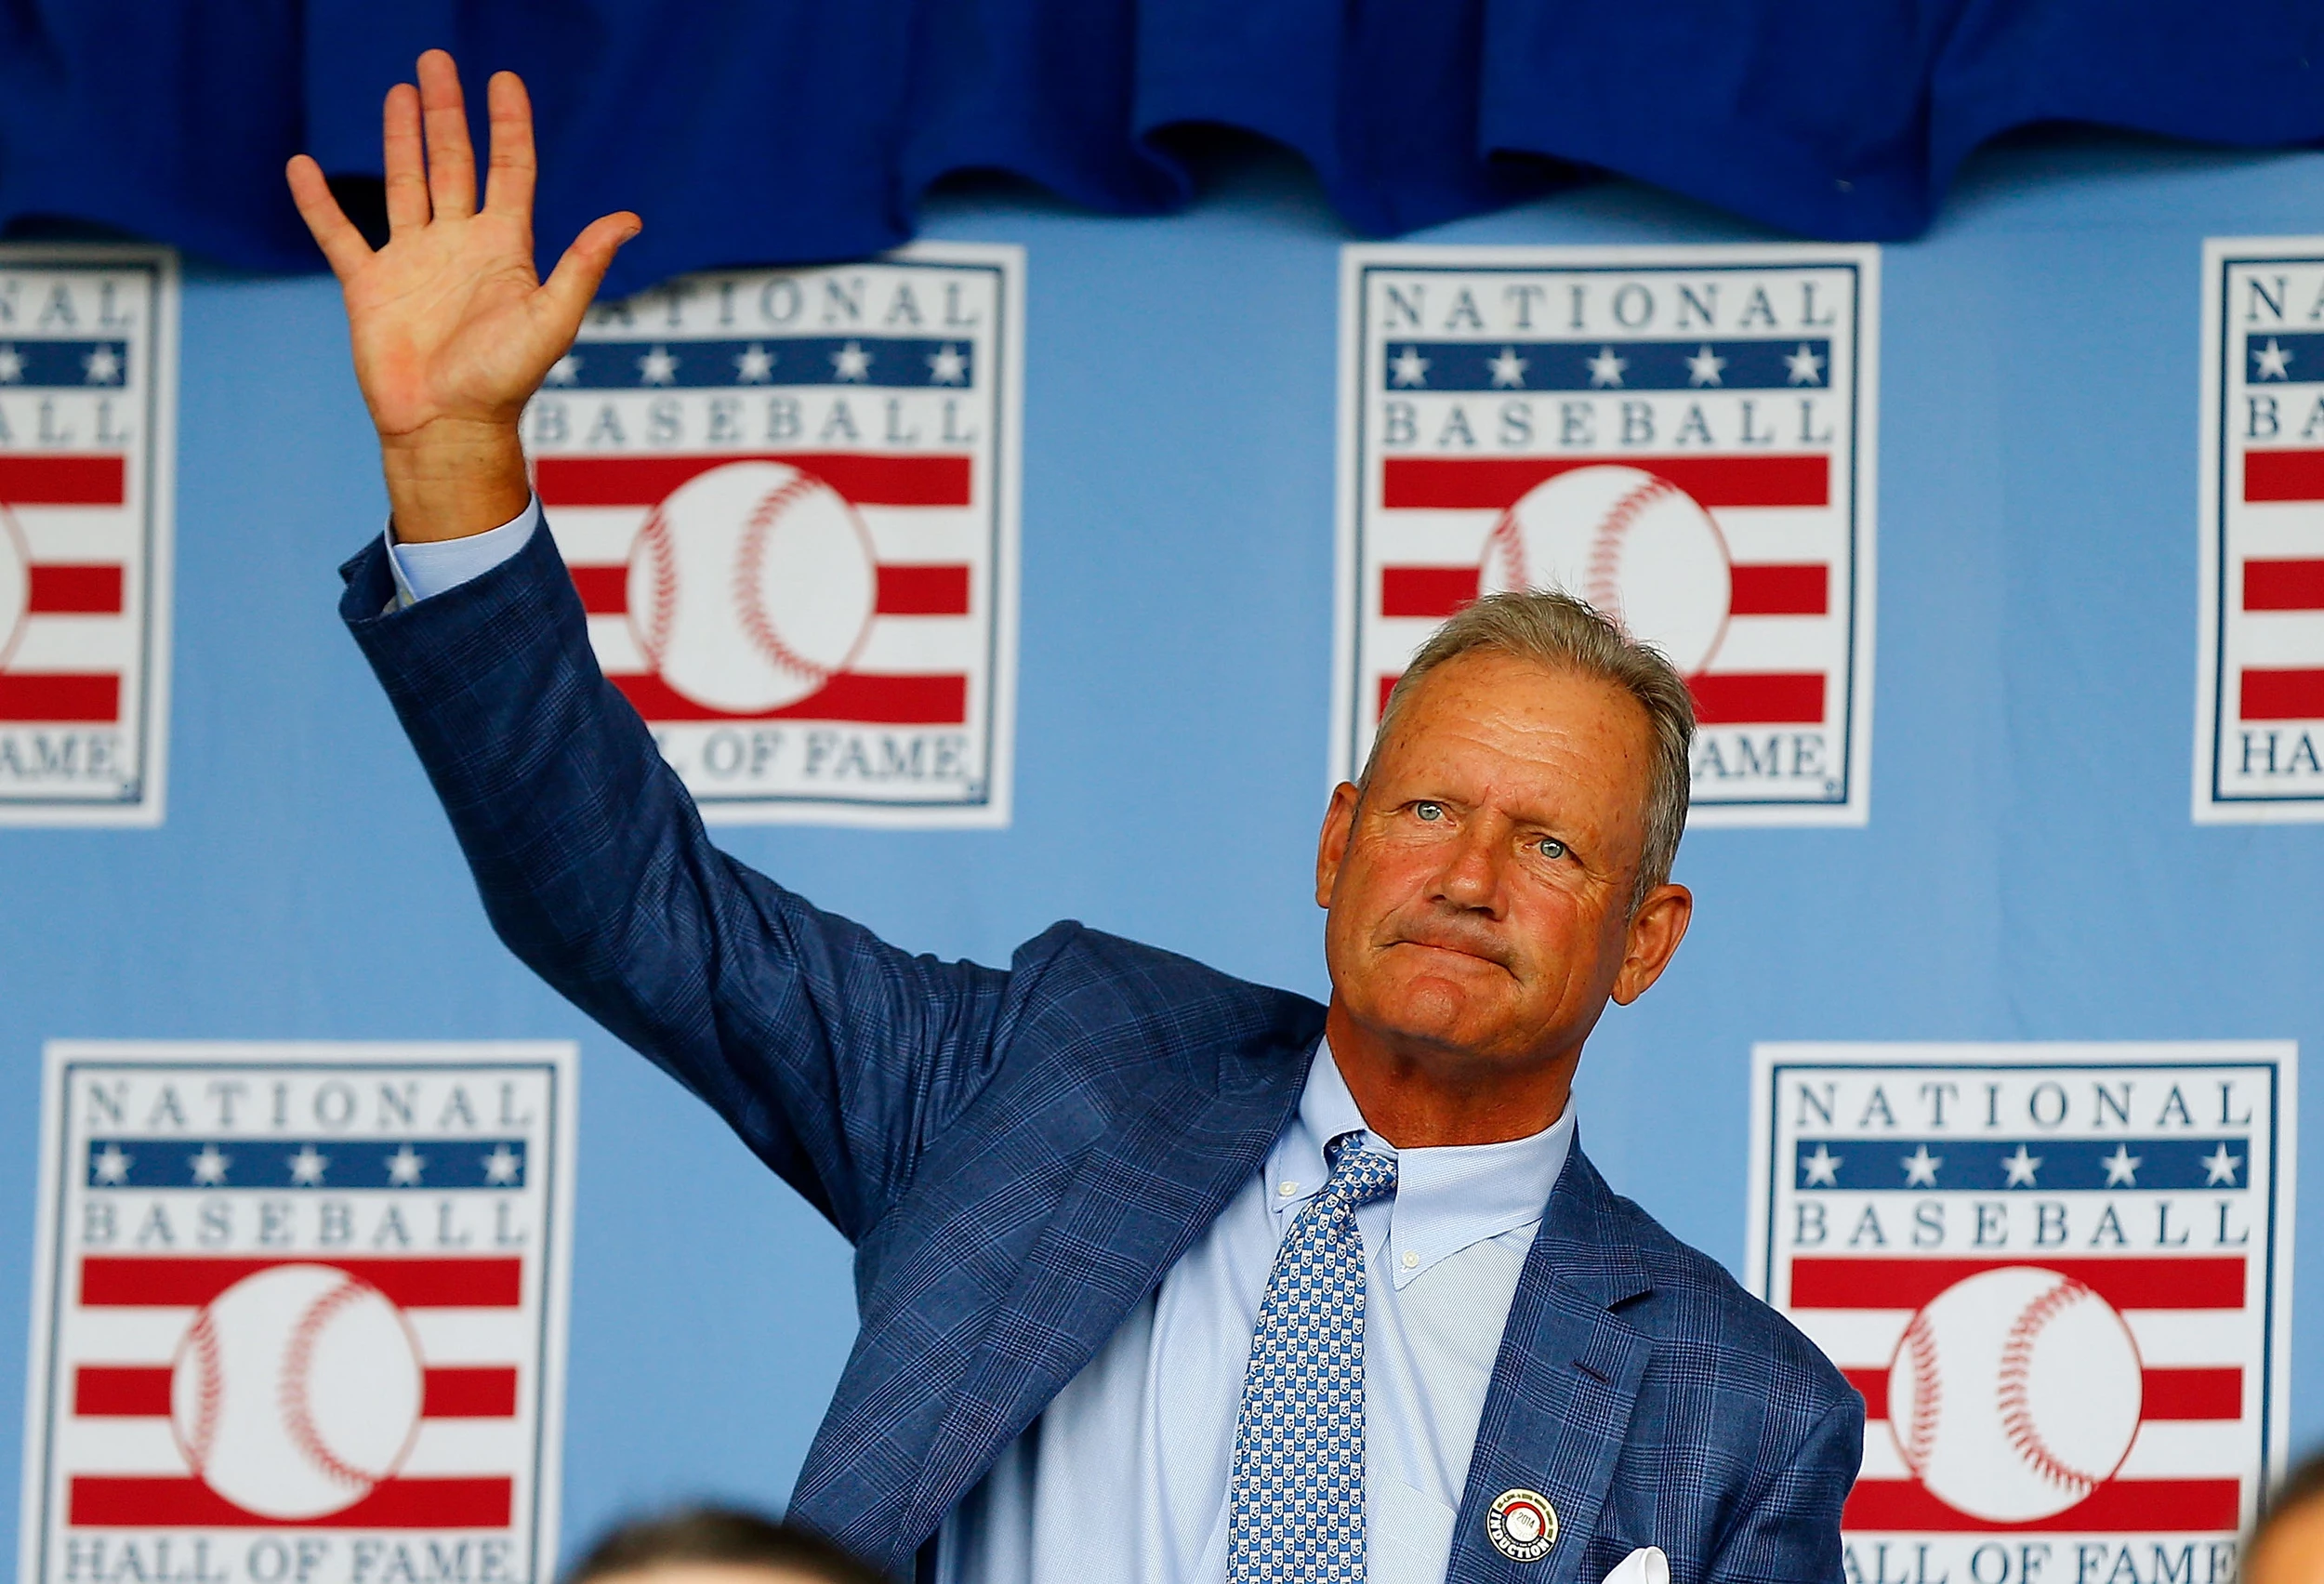 Kansas City Royals should retire at least one number for Bret